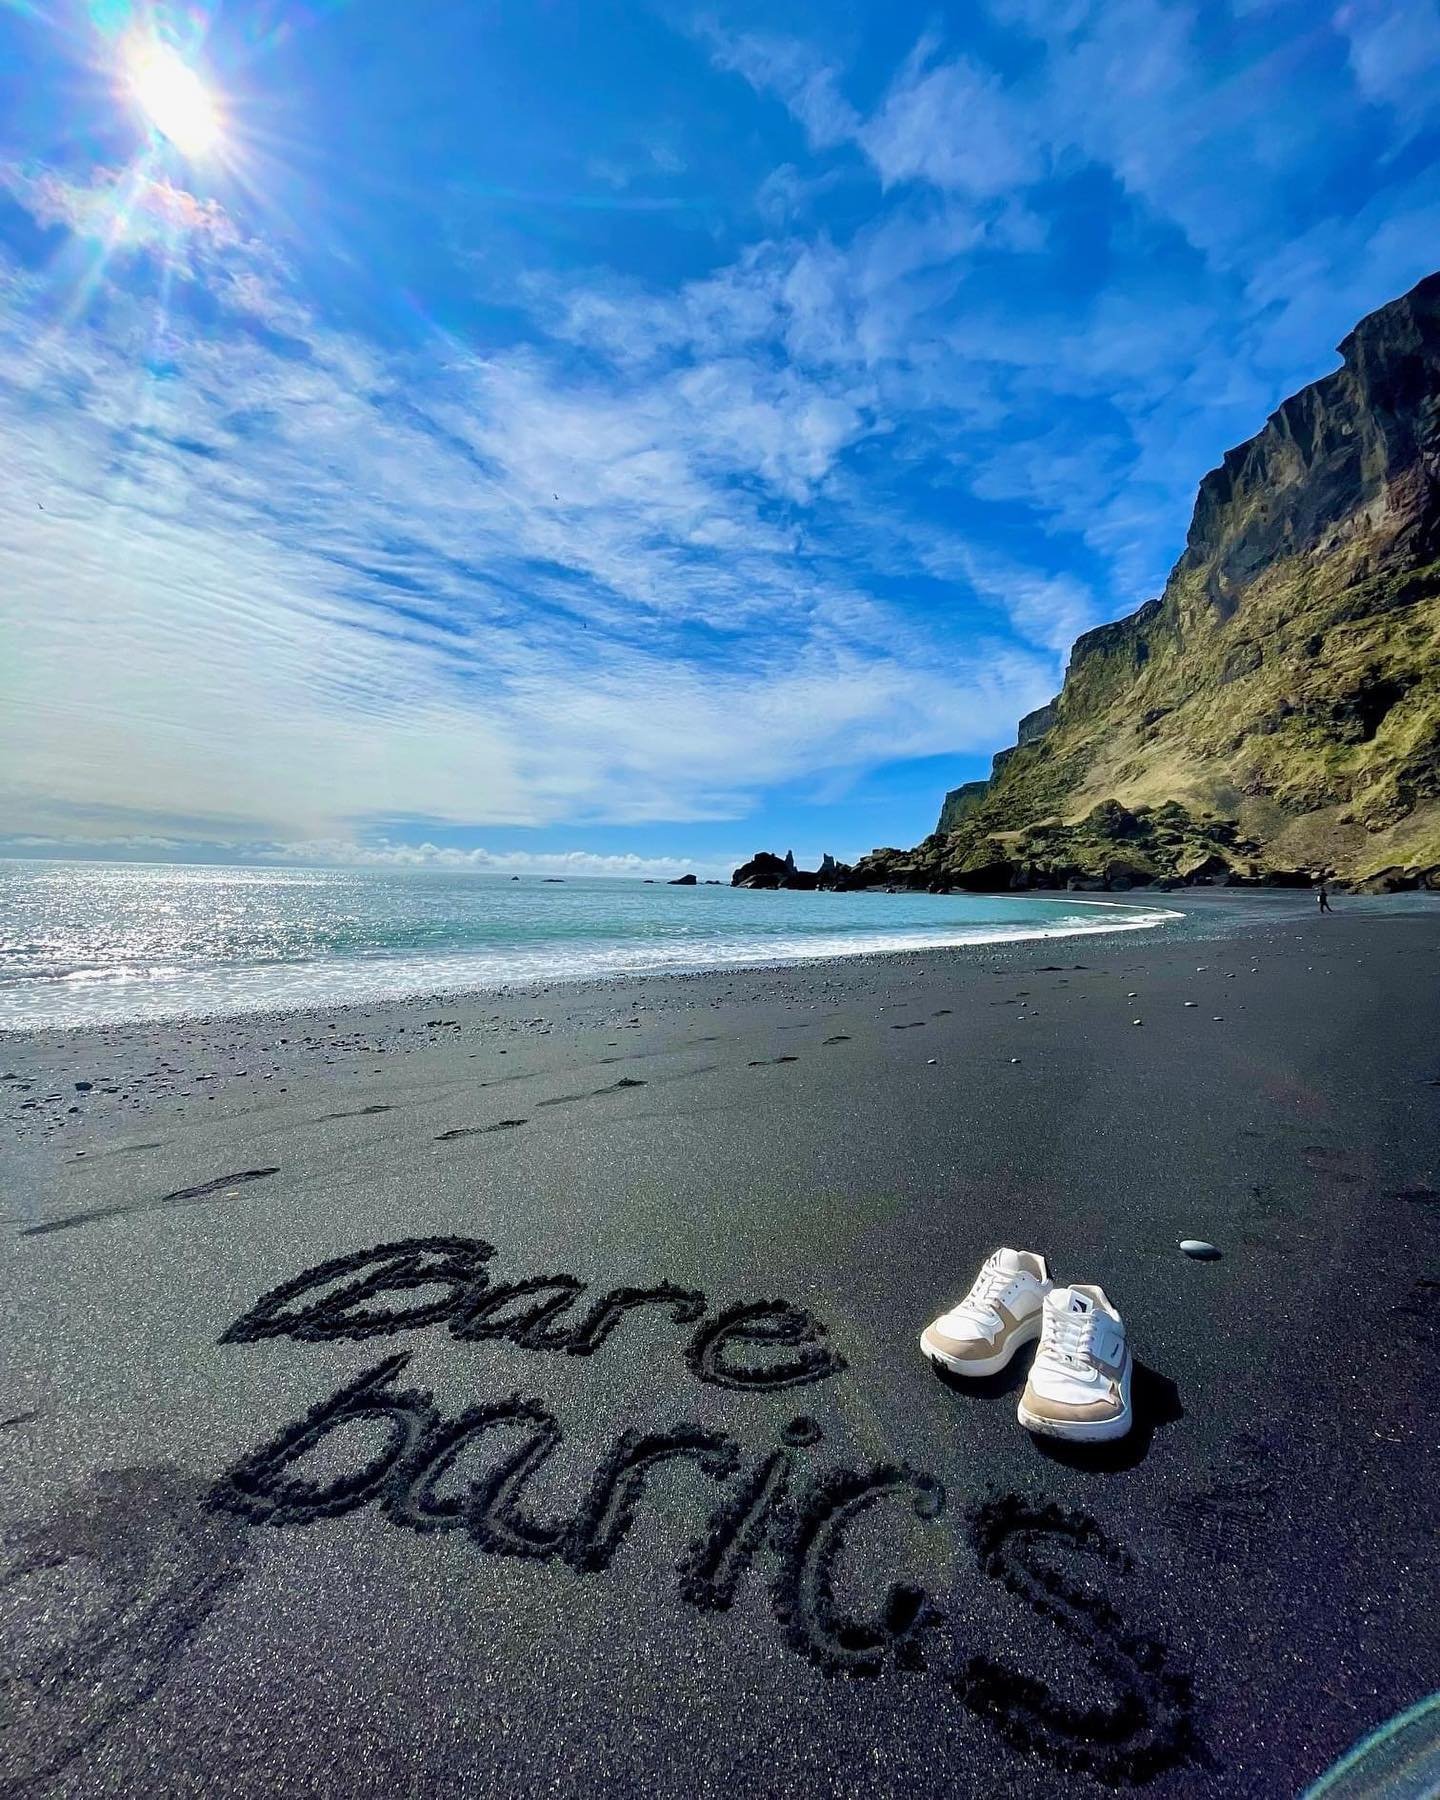 🏝 Encourage your curiosity, take your wandering shoes and explore new places. The world awaits you. 🌍
.
.
.
.
.
.
.
#iceland #barebarics #traveling #icelandtrip #springvibes #sneakers #vegan